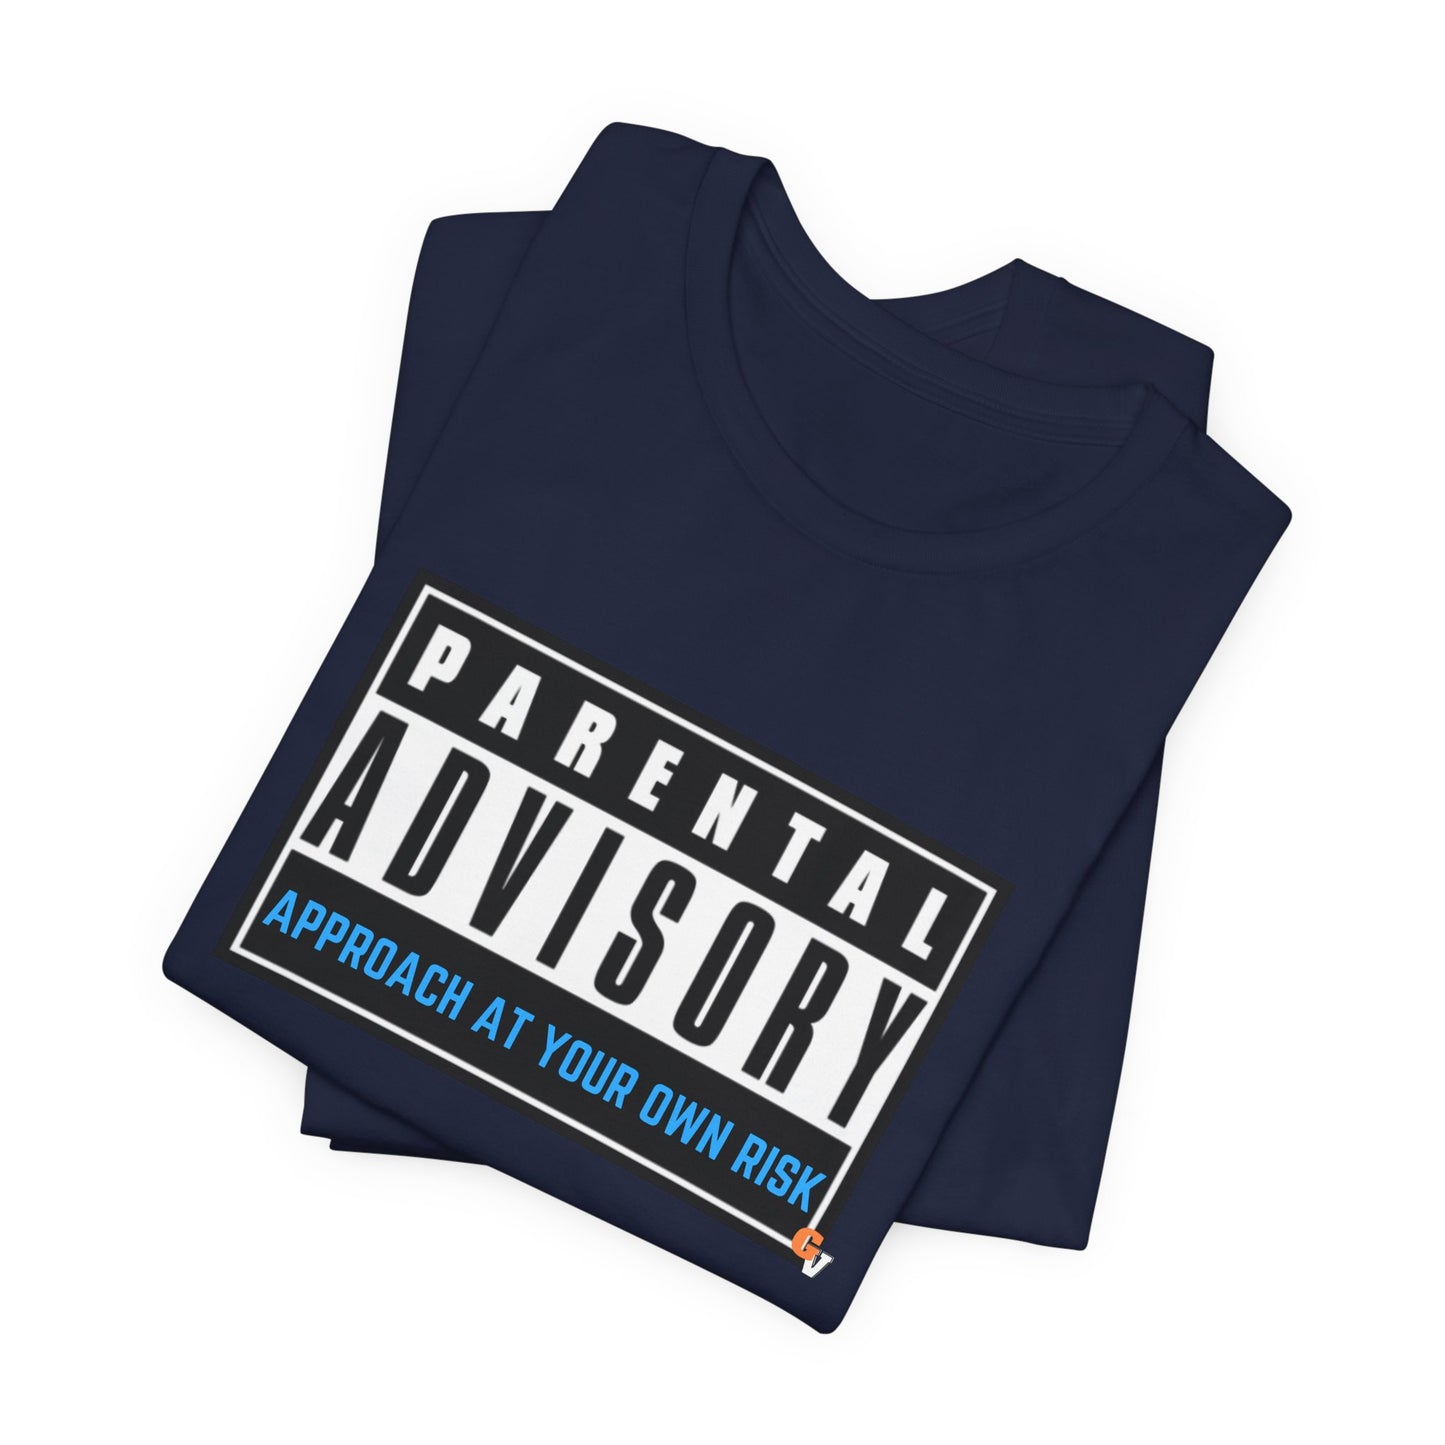 APPROACH AT YOUR OWN RISK LIGHT BLUE: Unisex Jersey Short Sleeve Tee